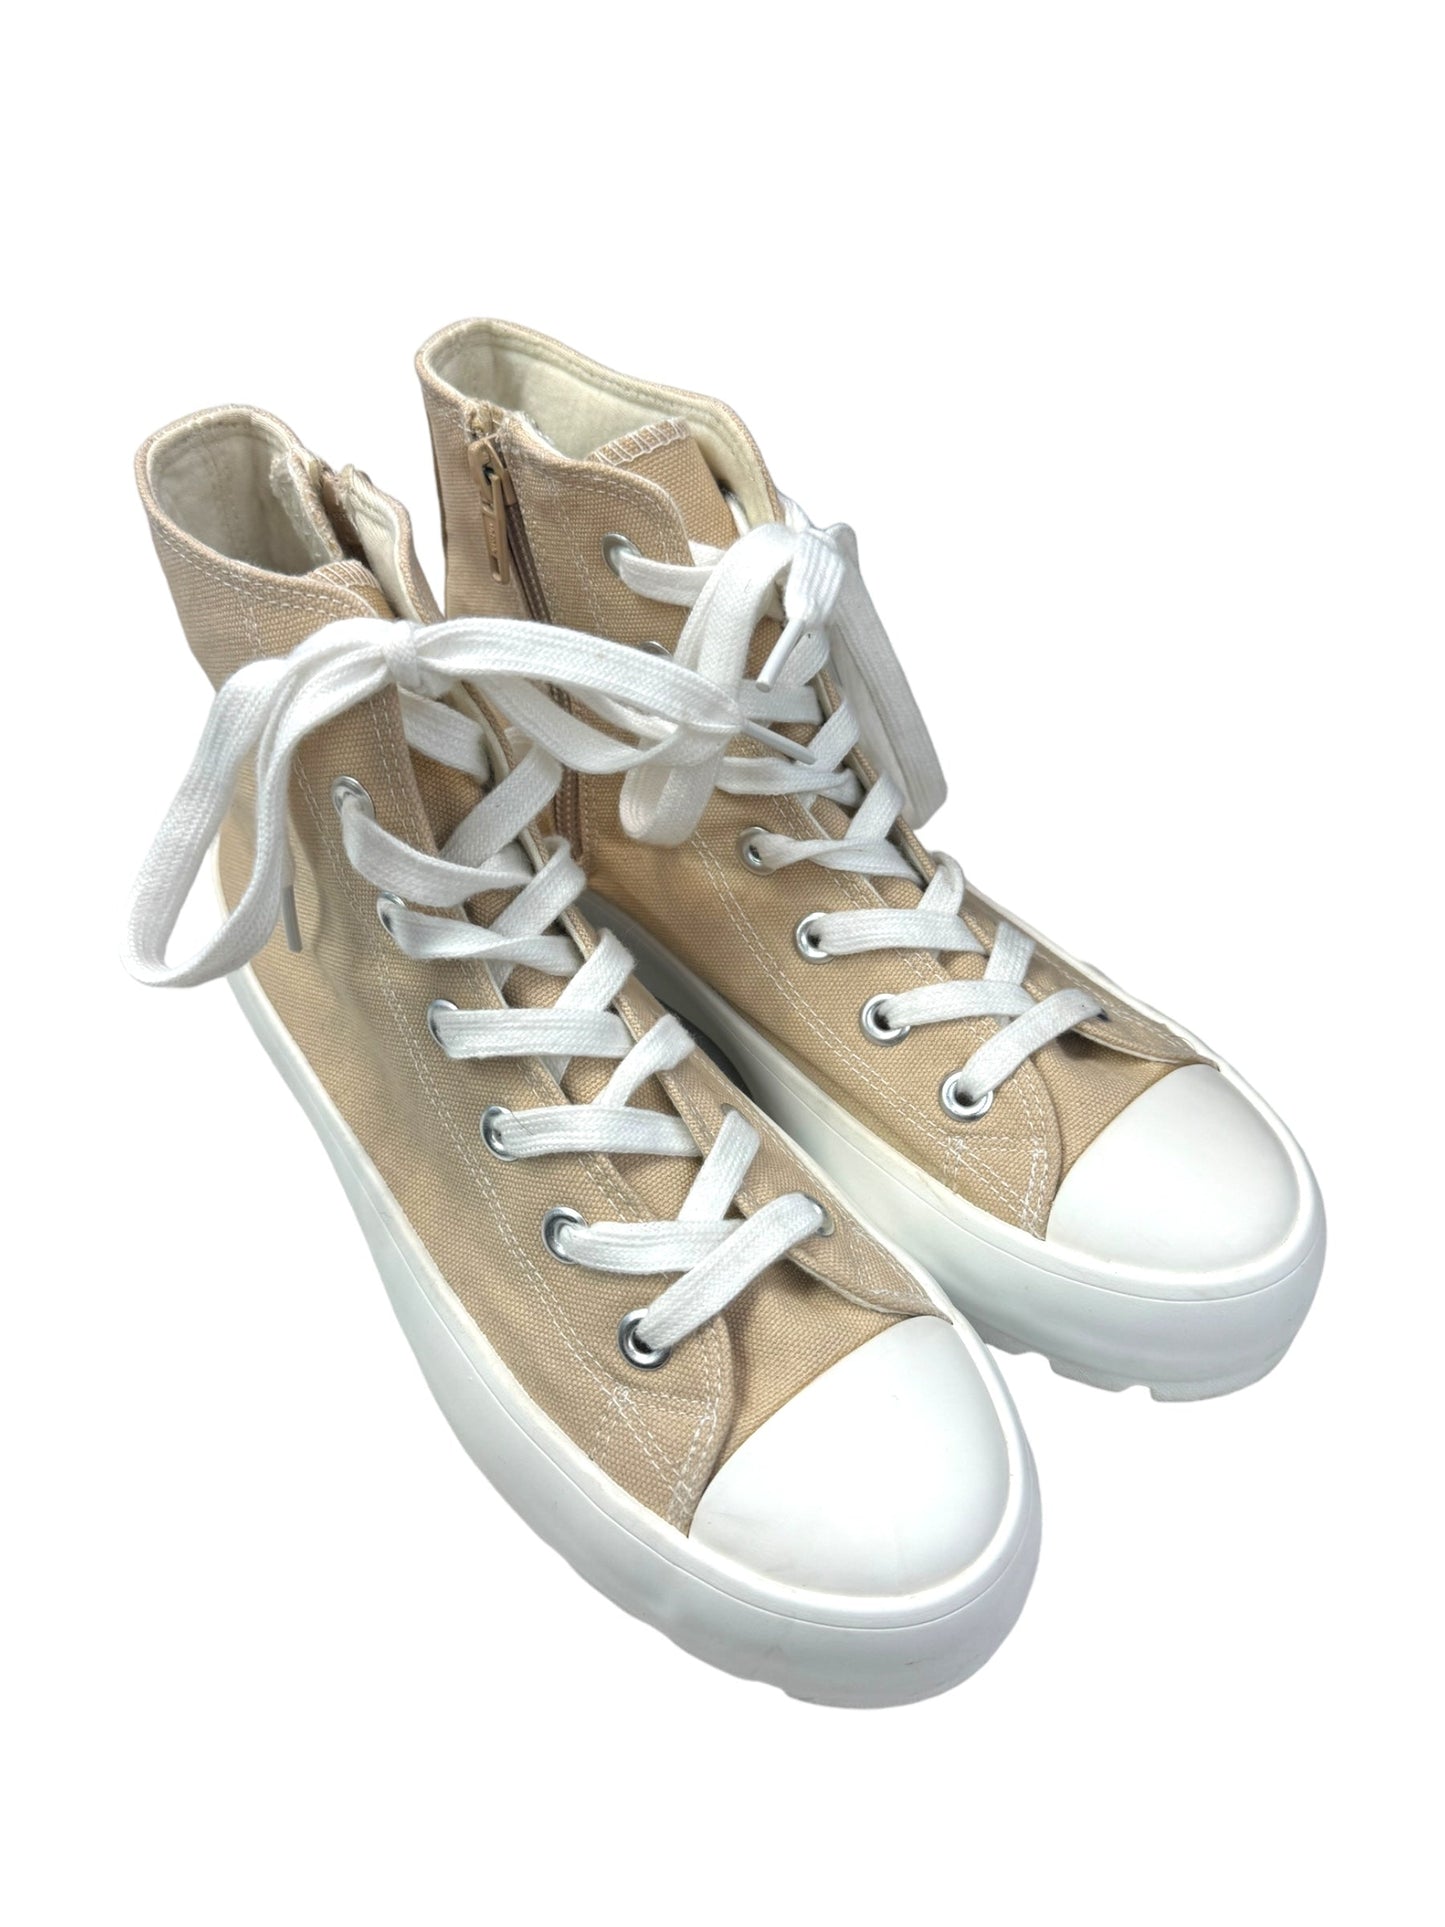 Tan Shoes Sneakers Clothes Mentor, Size 8